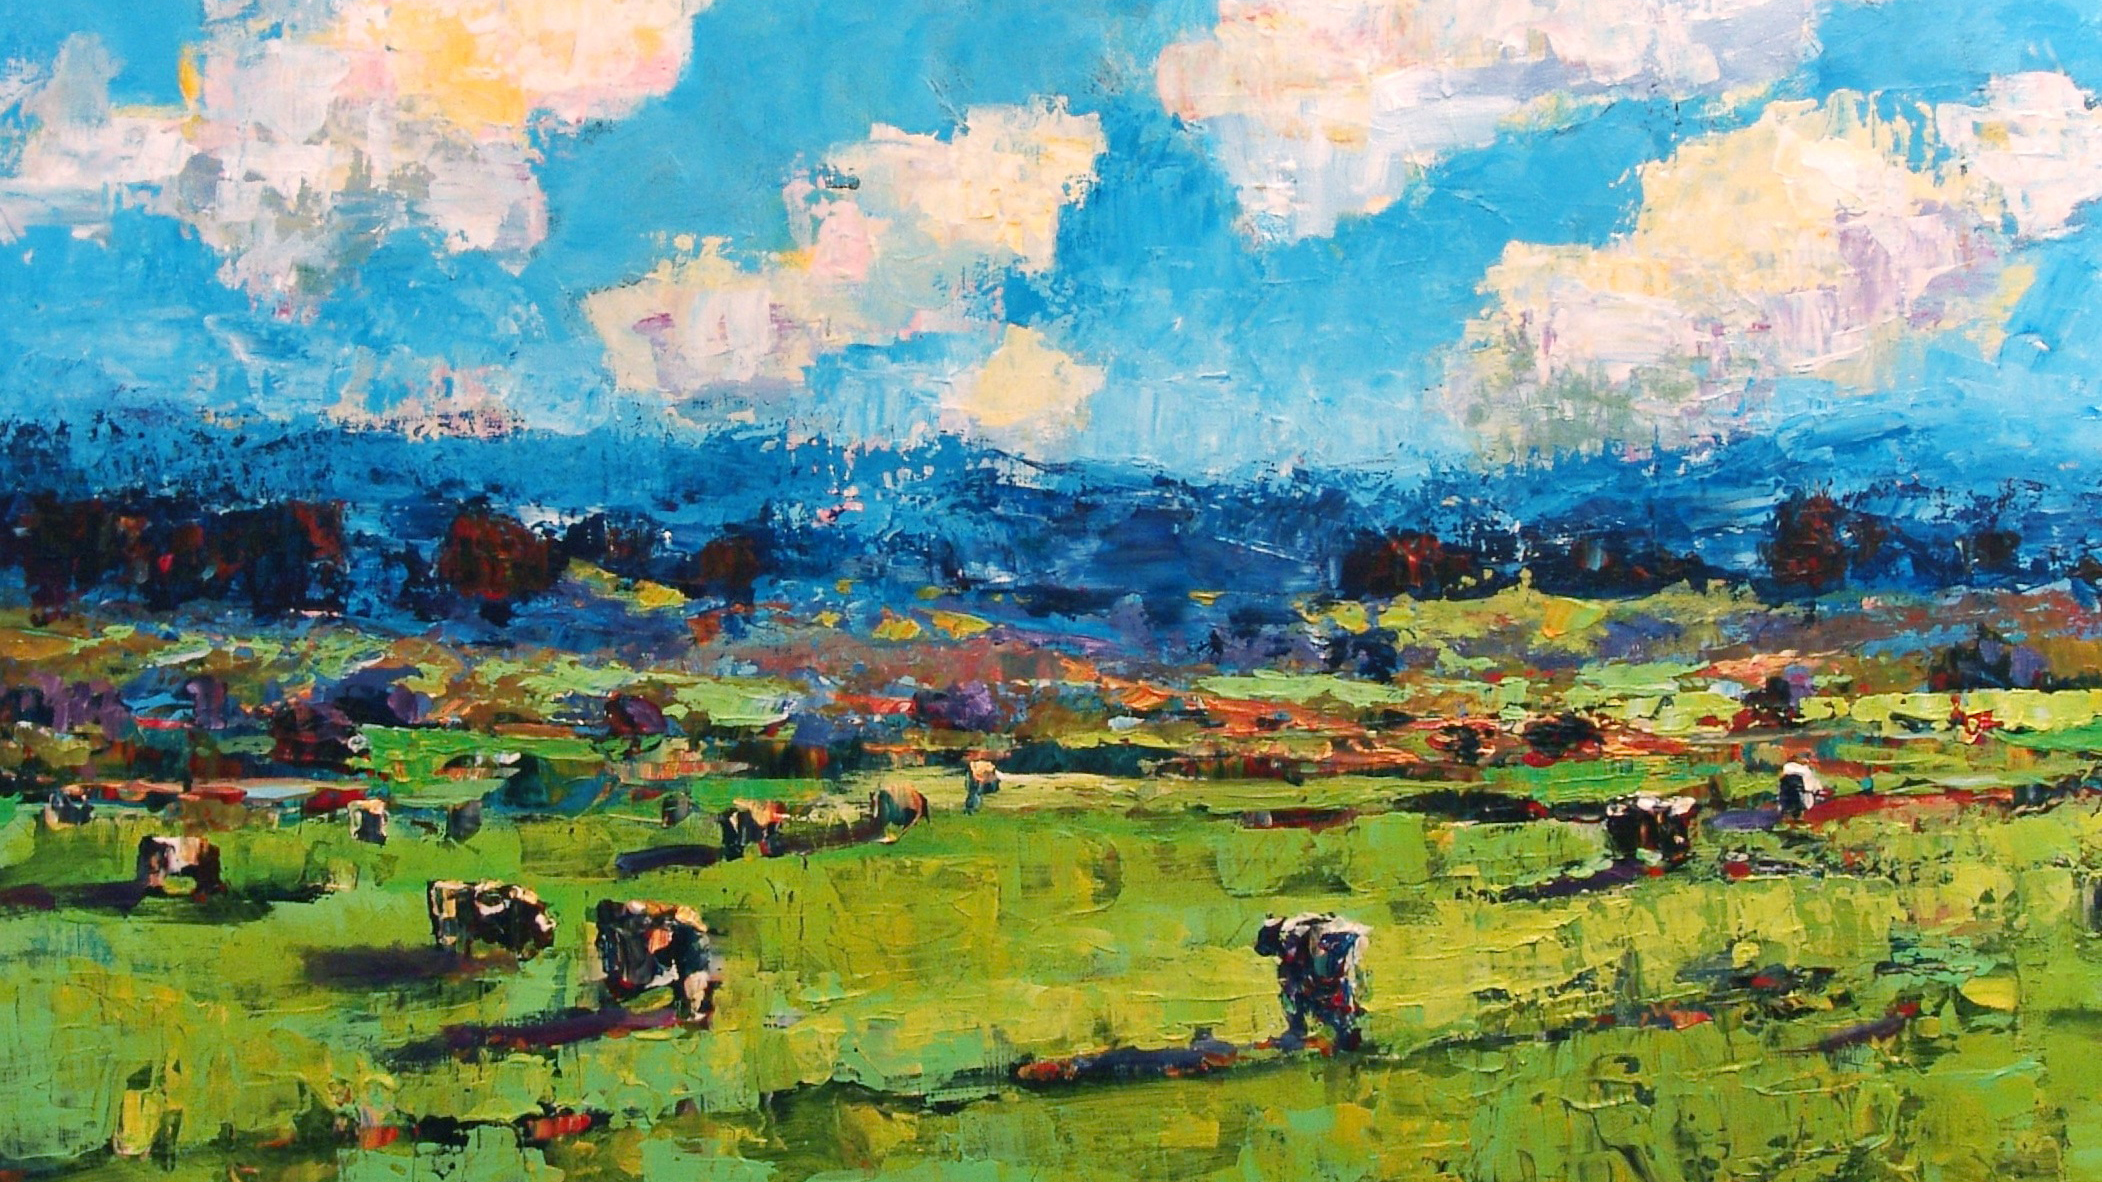 A painting of cows in a green field with a blue sky dotted with clouds overhead executed with brushy, gestural visible brushstrokes